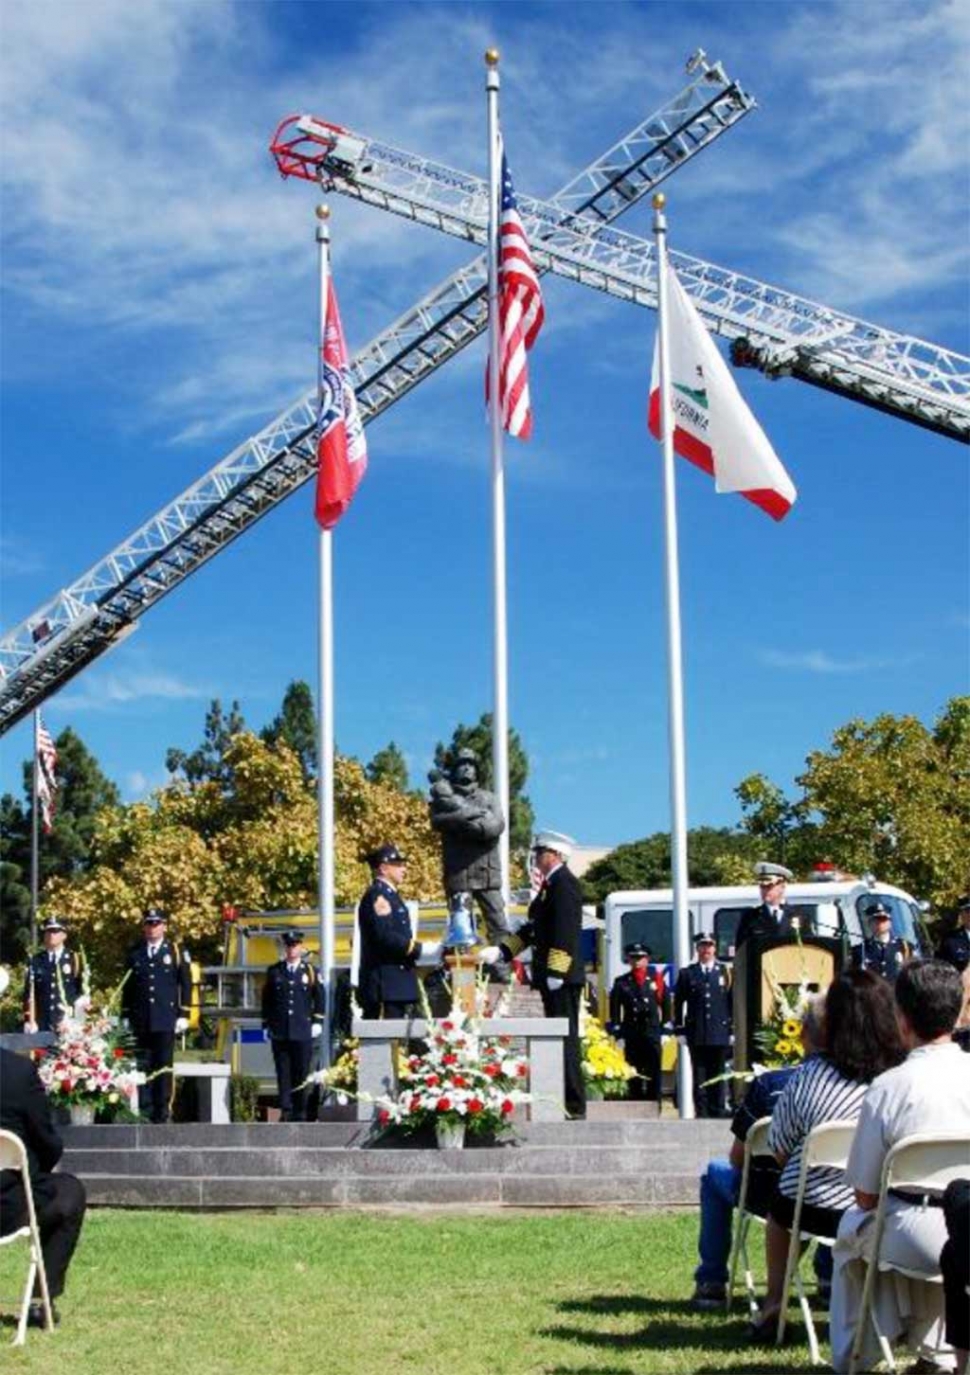 On Friday, November 17th at 10am a ceremony will take place on the lawn surrounding the Memorial at Ventura County Government Center, inducting Chief Rigo Landeros into the Fallen Firefighters Memorial. The Memorial is open to the public.